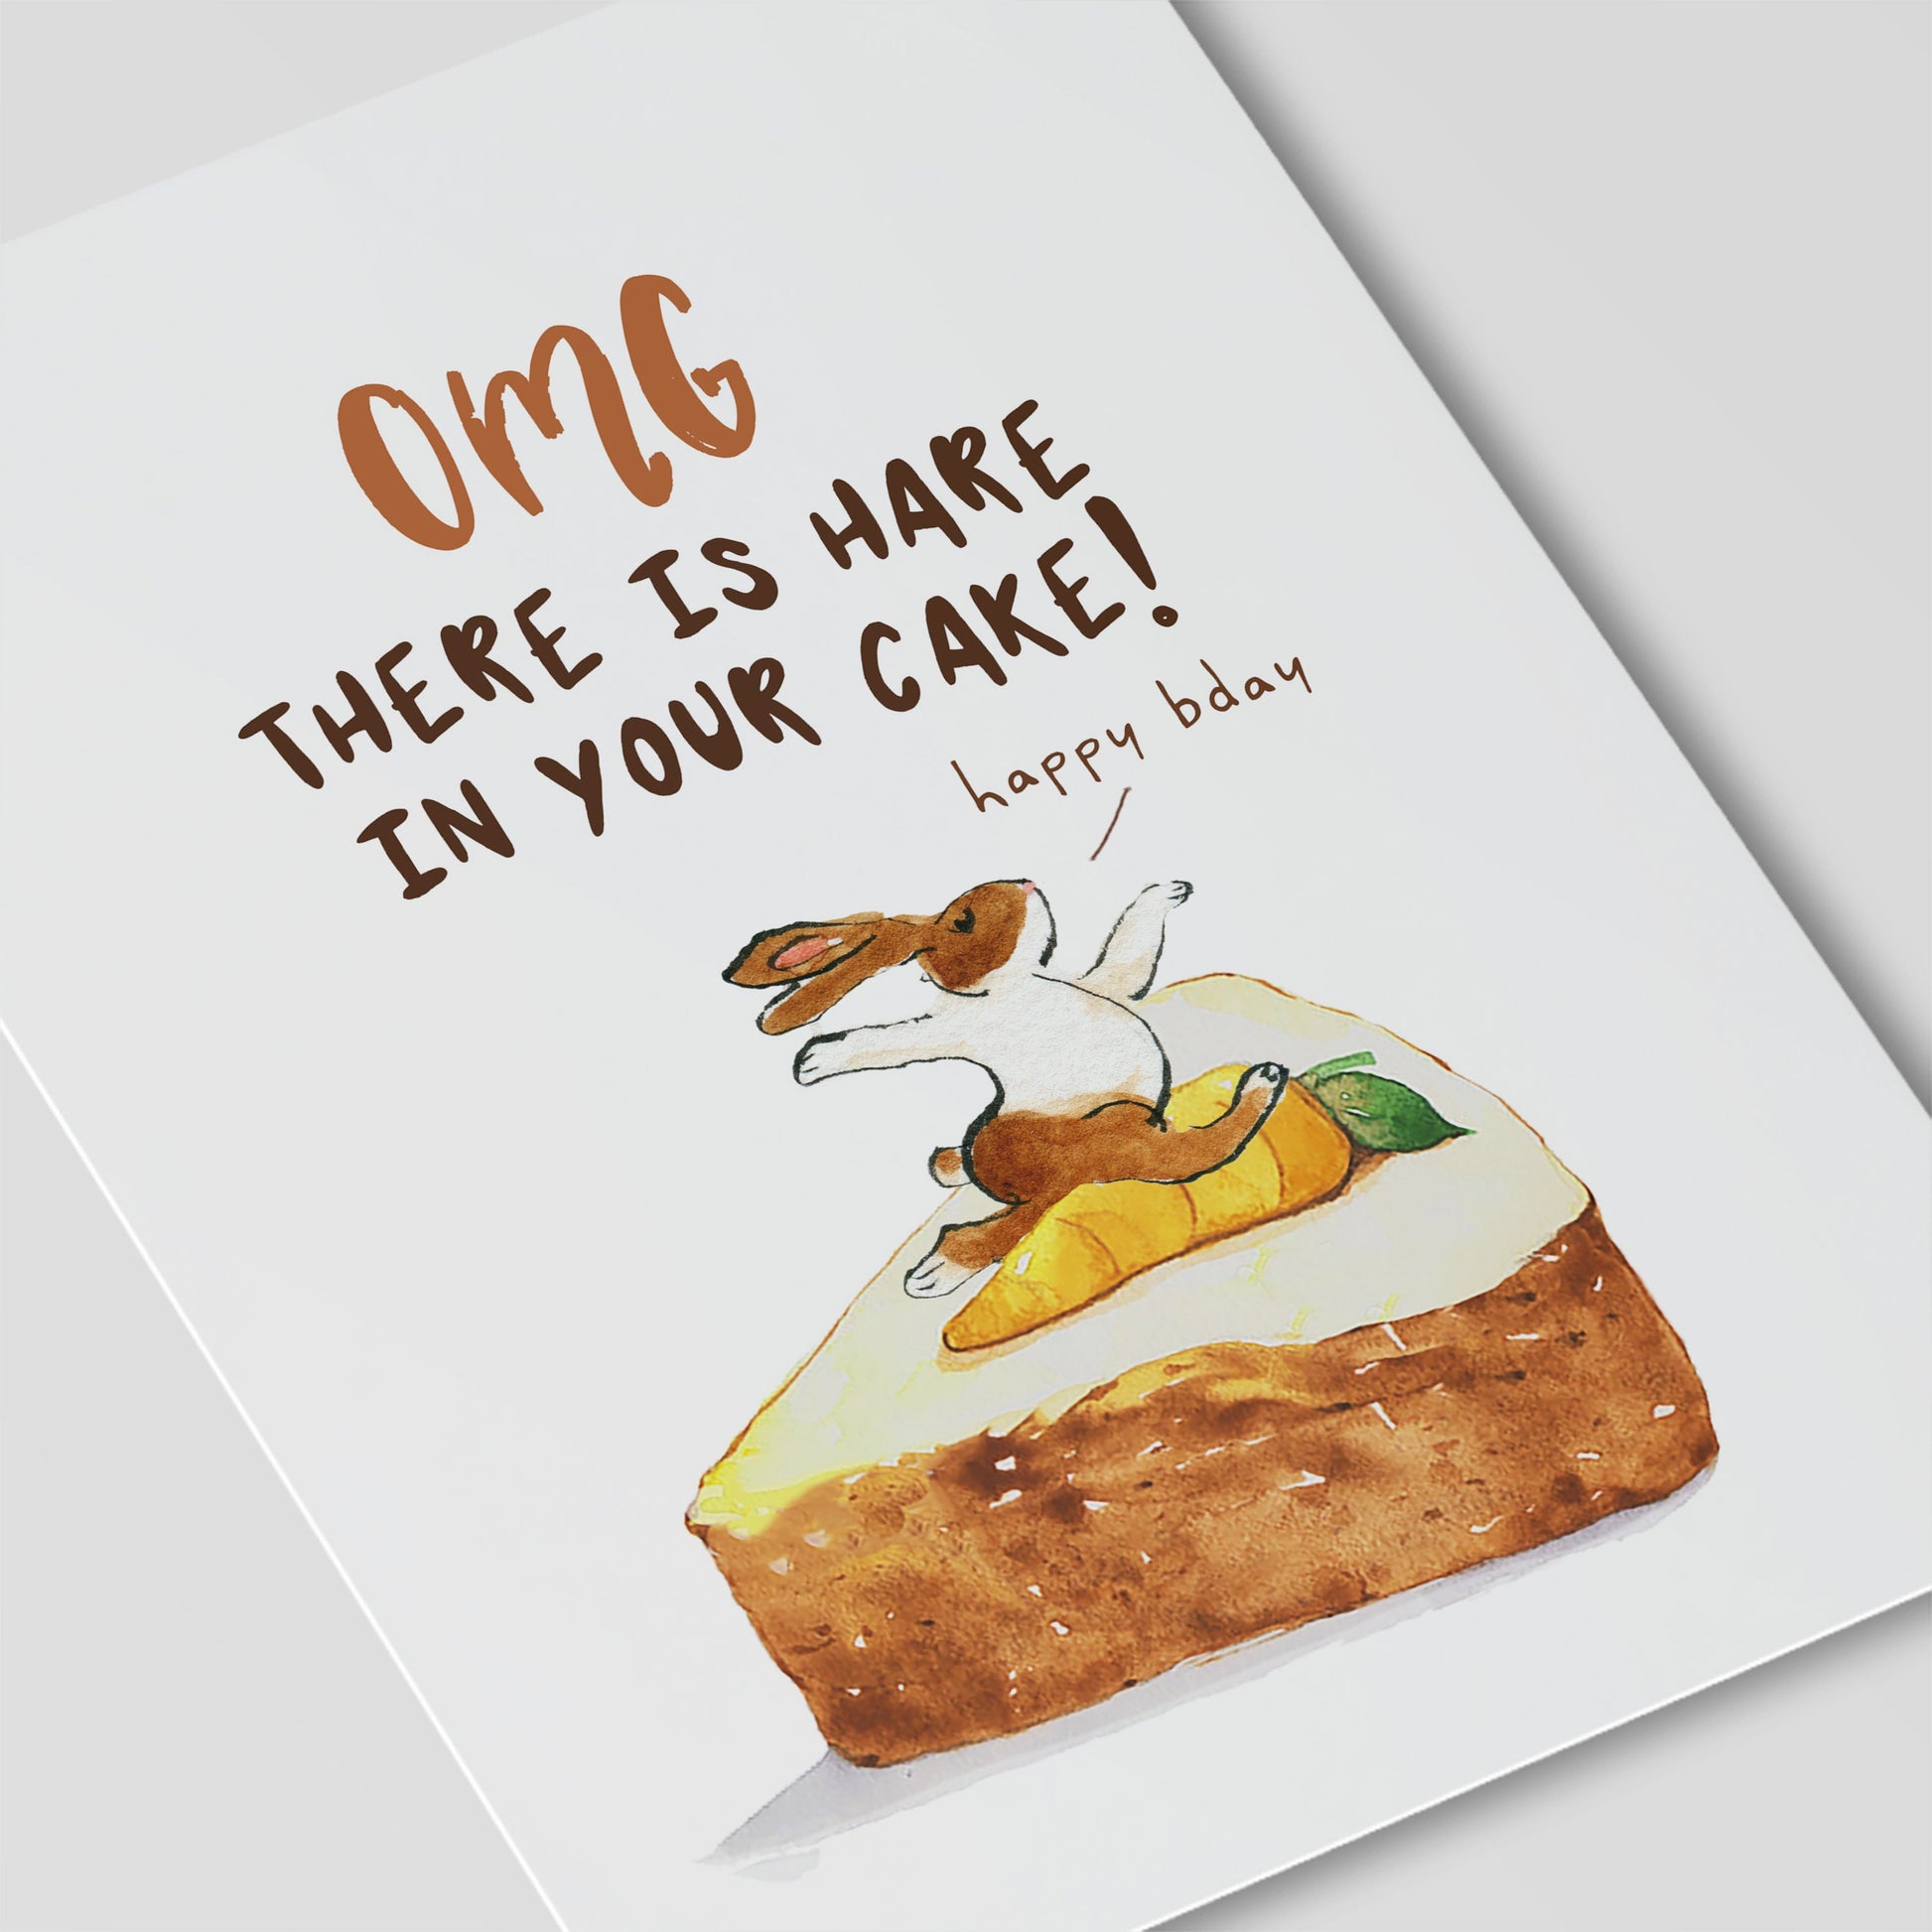 Bunny Carrot Cake Birthday Card Funny - OMG Hare In Your Cake - Kid Birthday Gifts